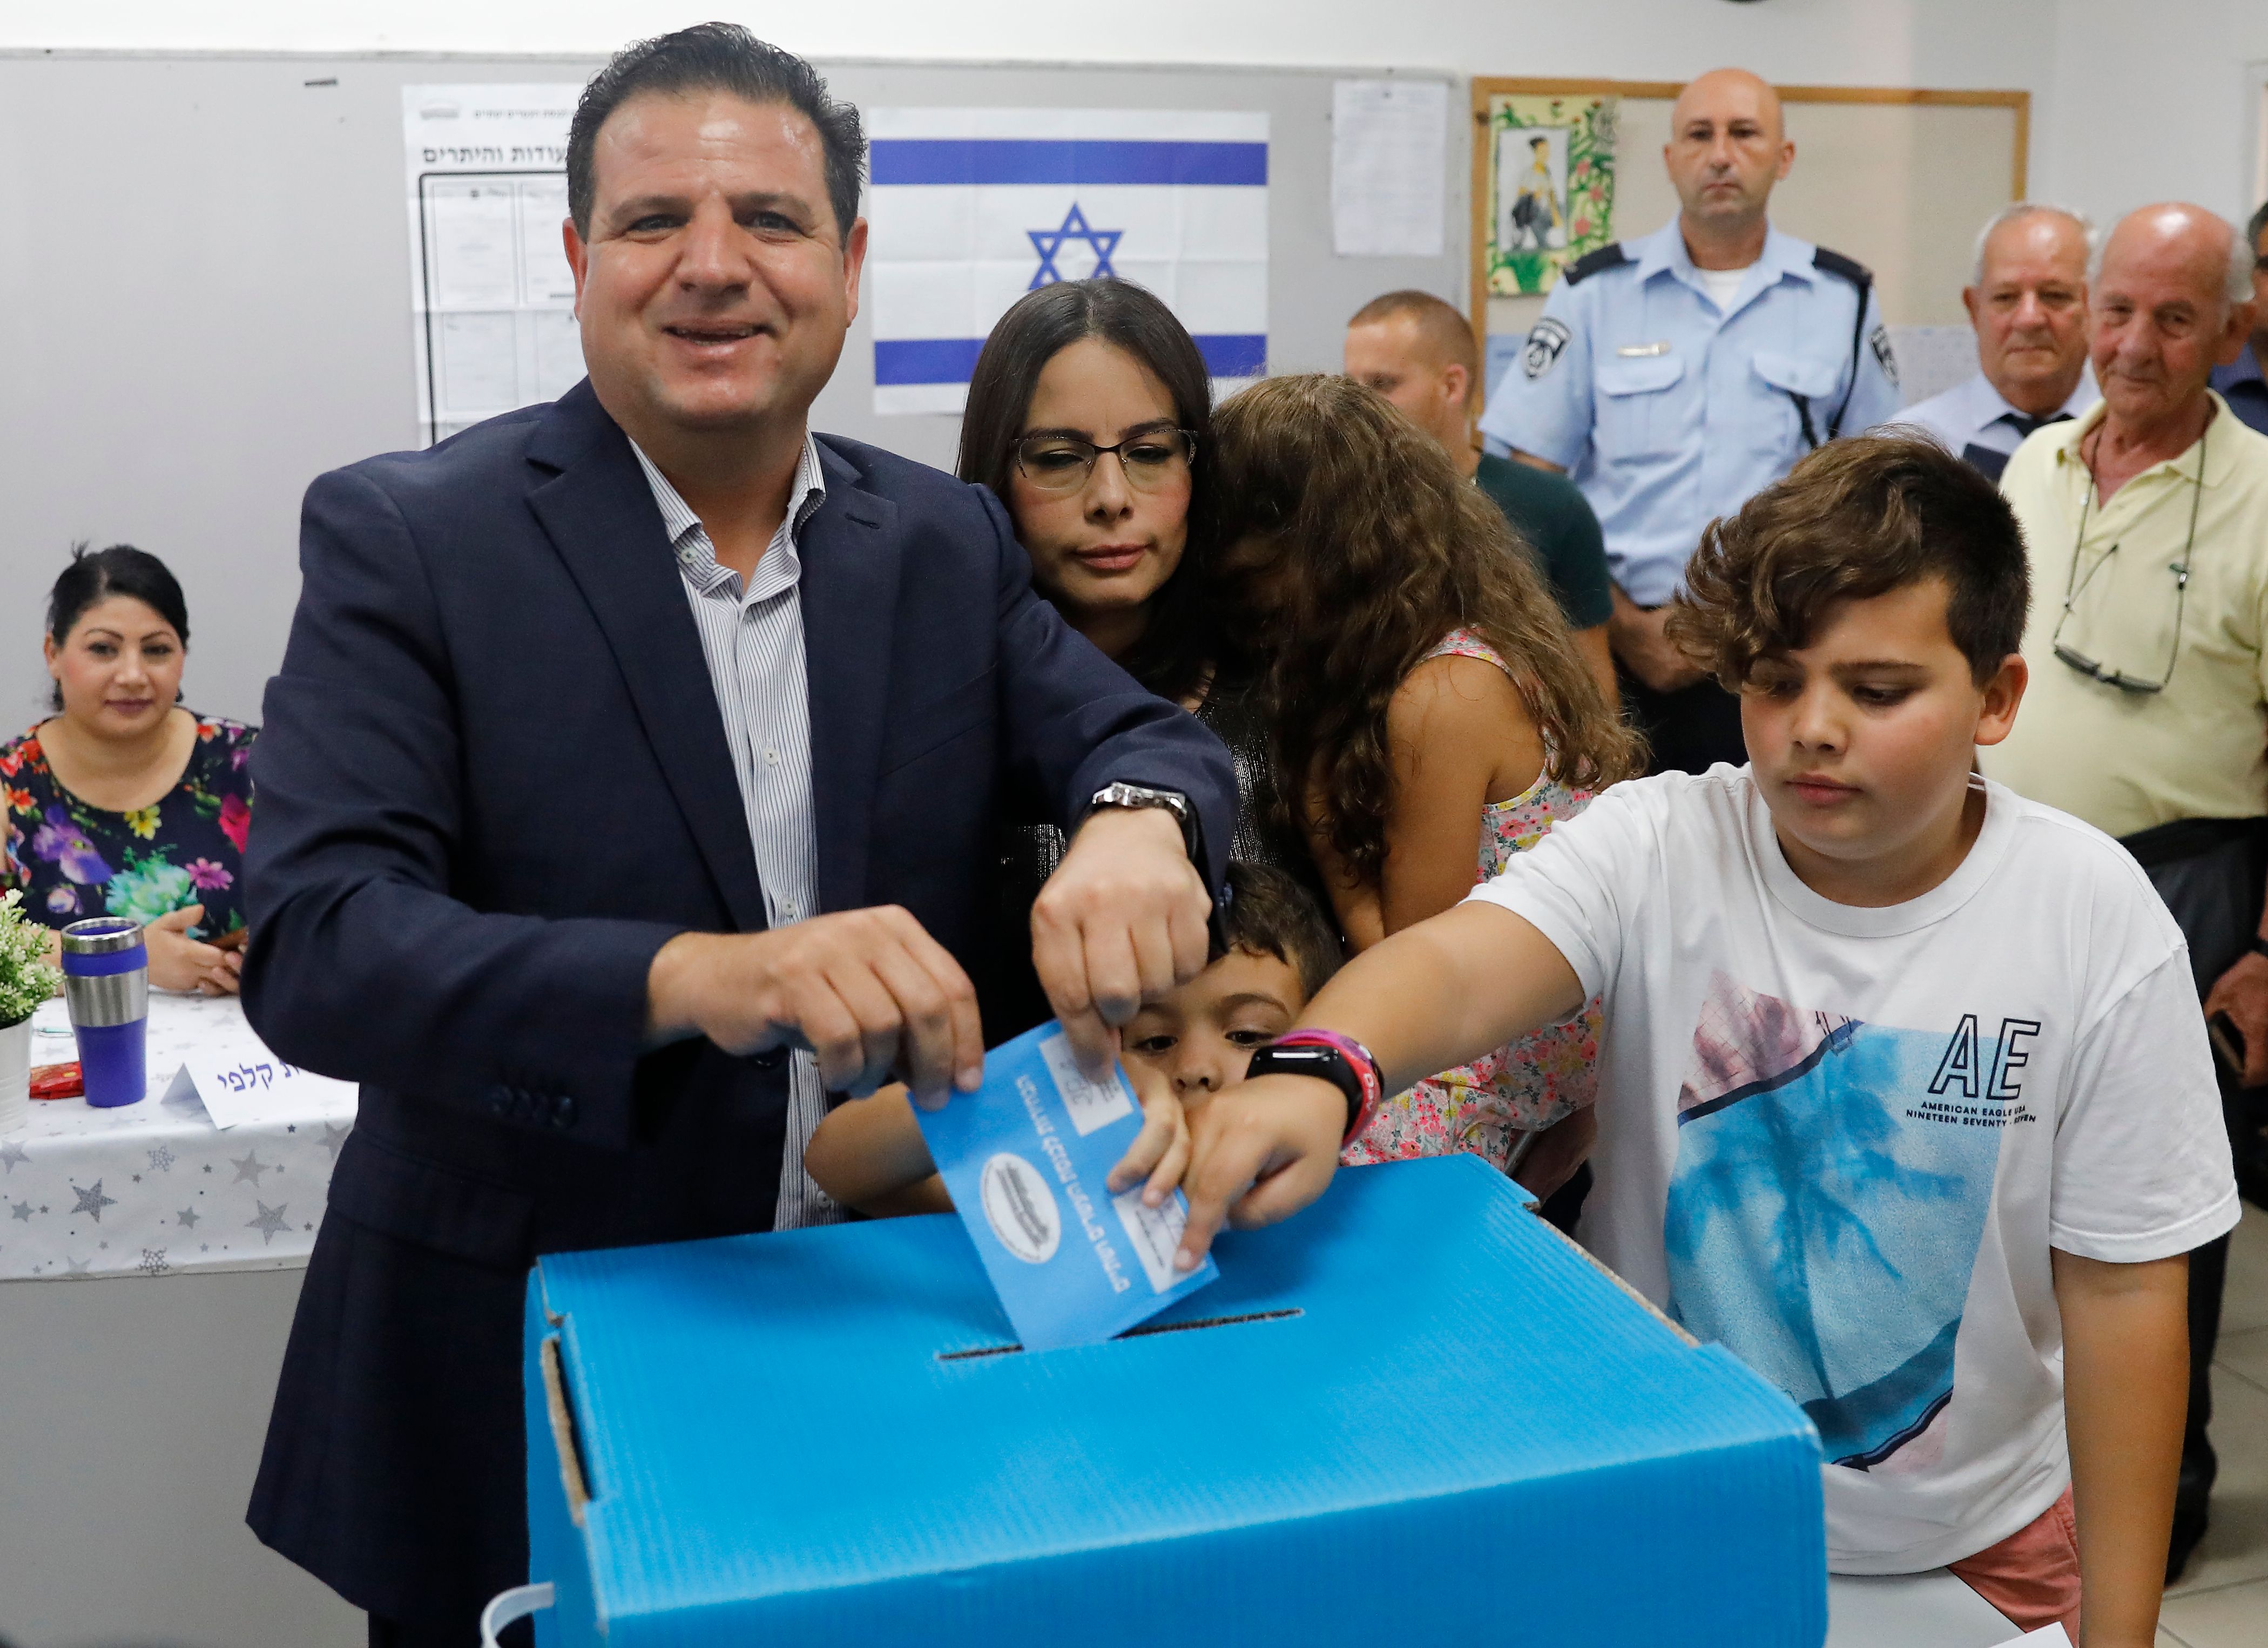 Israel's head of the mainly Arab Joint List alliance Ayman Odeh casts his ballot accompanied by his family during Israel's parliamentary election at a polling station in Haifa on September 17, 2019. (Ahmad Gharabli—AFP/Getty Images)